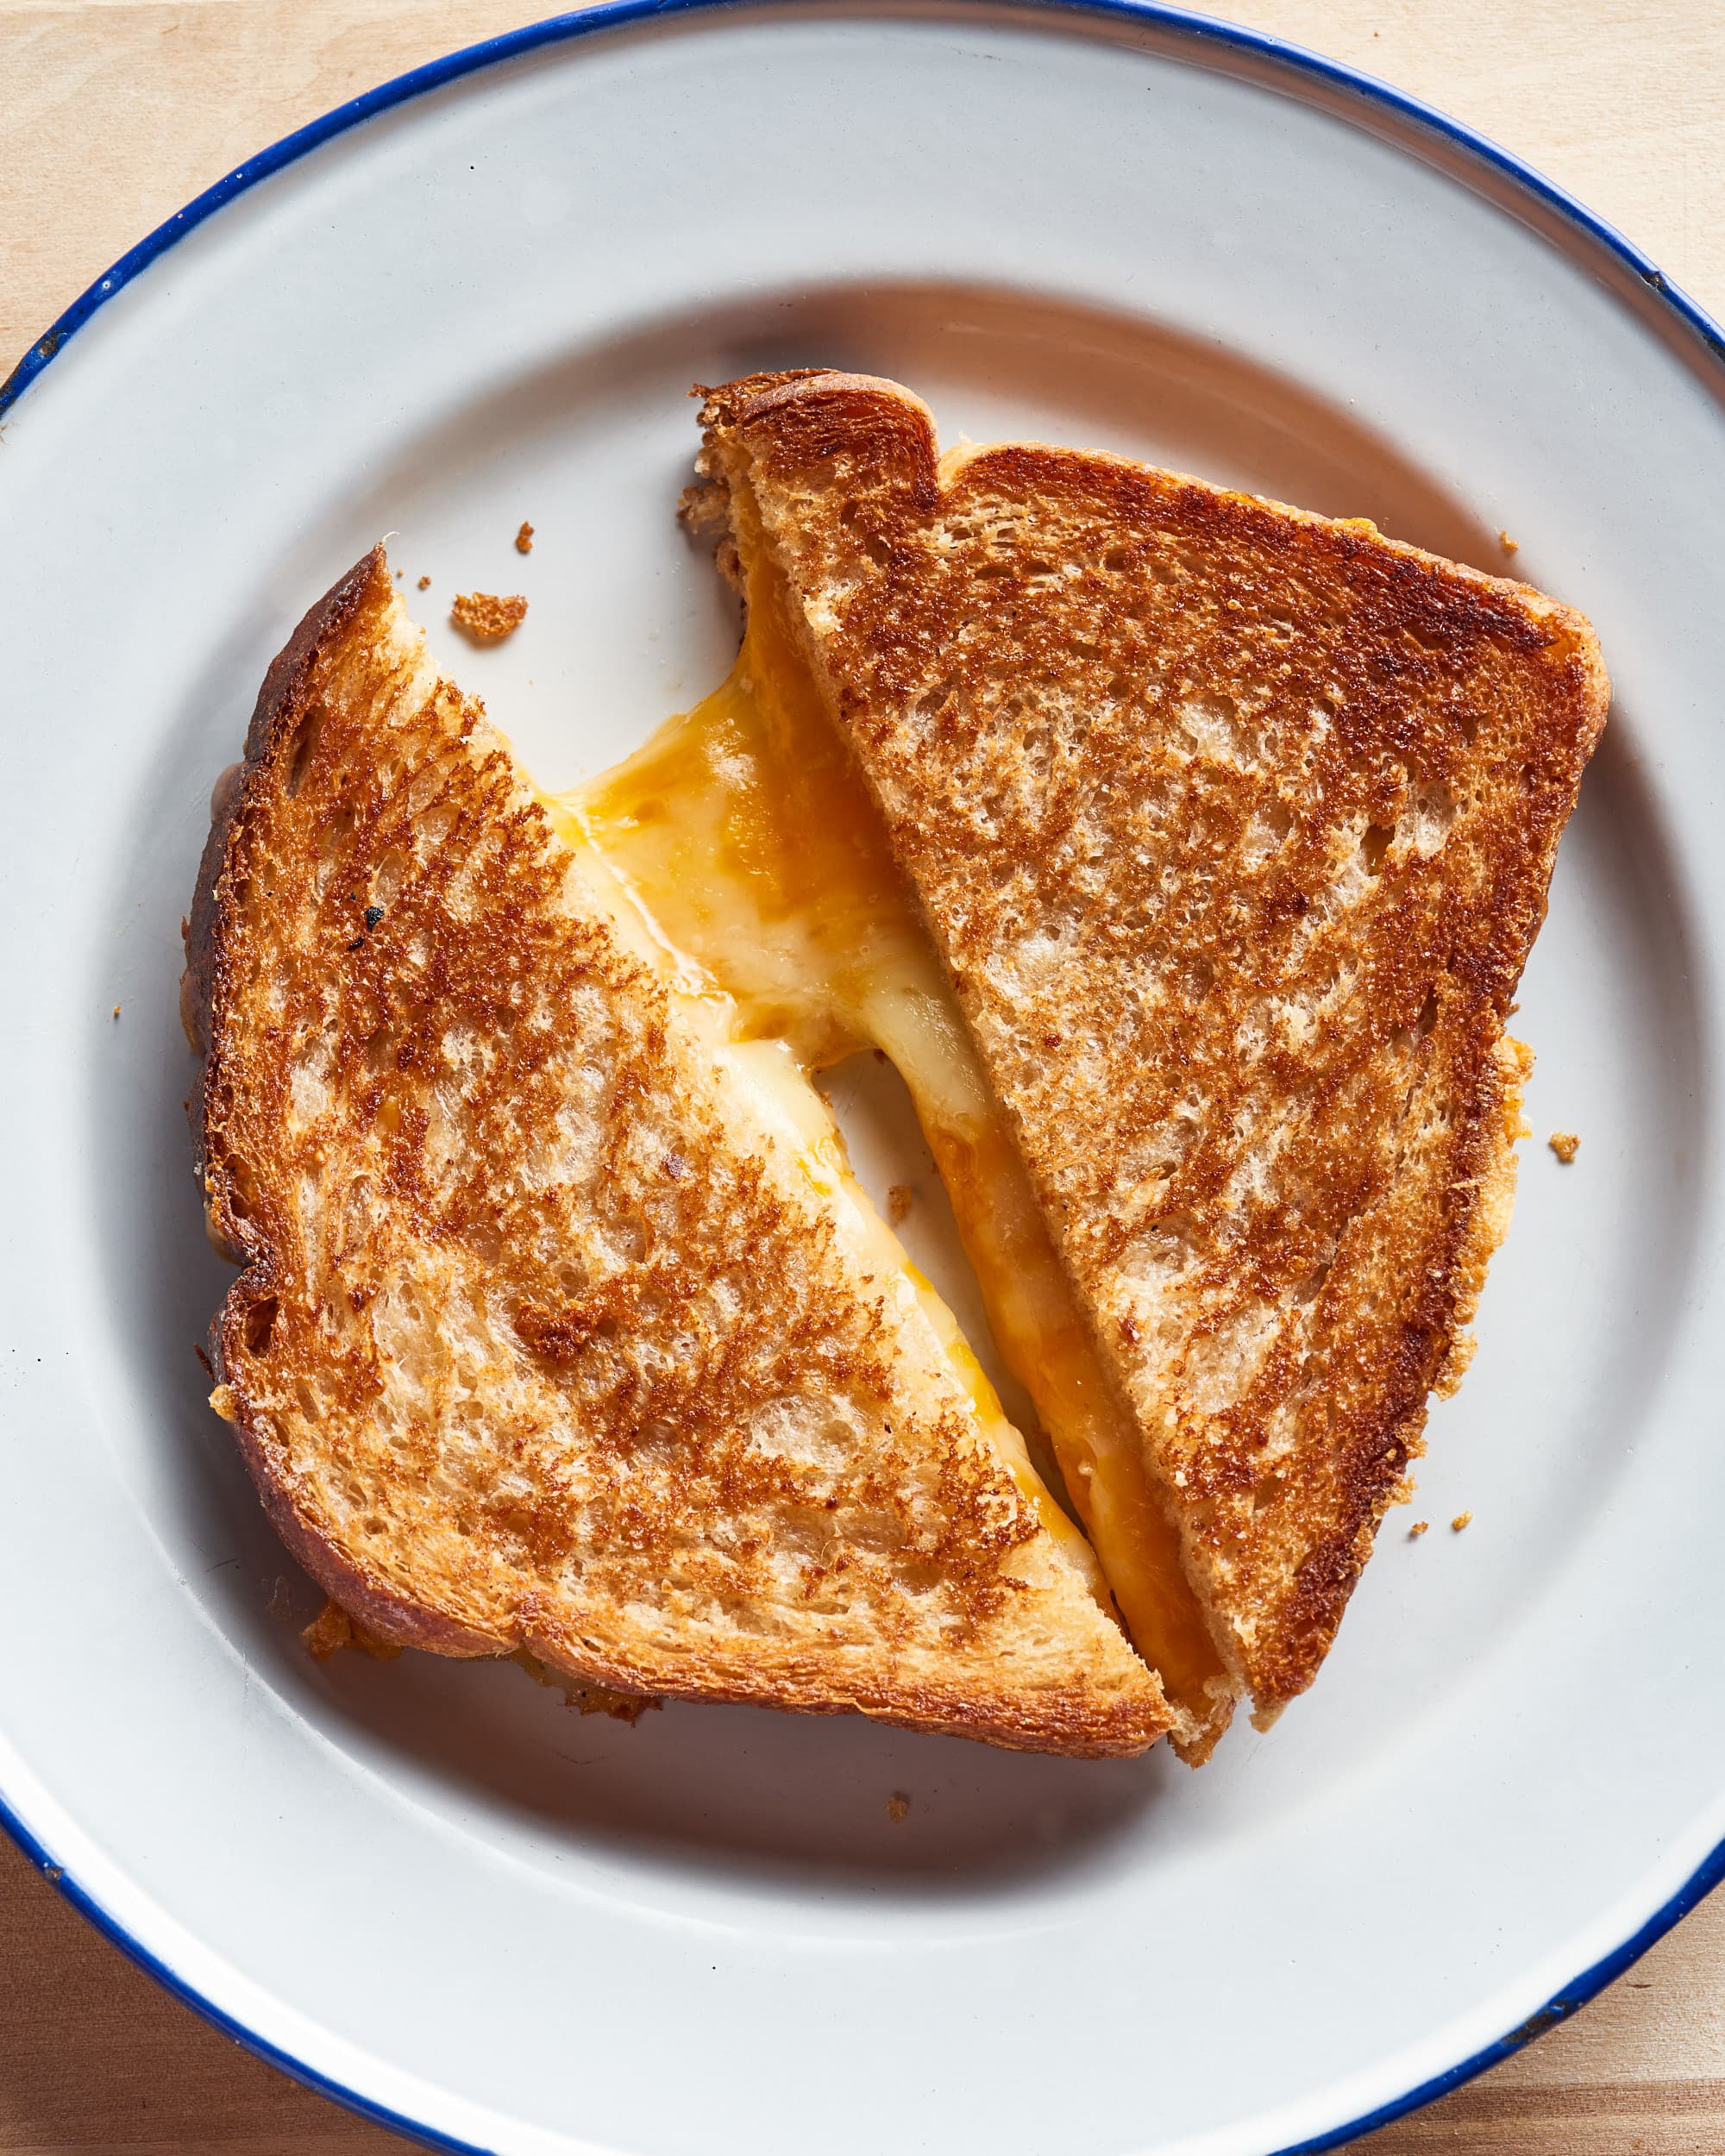 https://cdn.apartmenttherapy.info/image/upload/v1613775650/k/Photo/Recipes/2021-02-air-fryer-grilled-cheese/2021-02-16_ATK109276.jpg